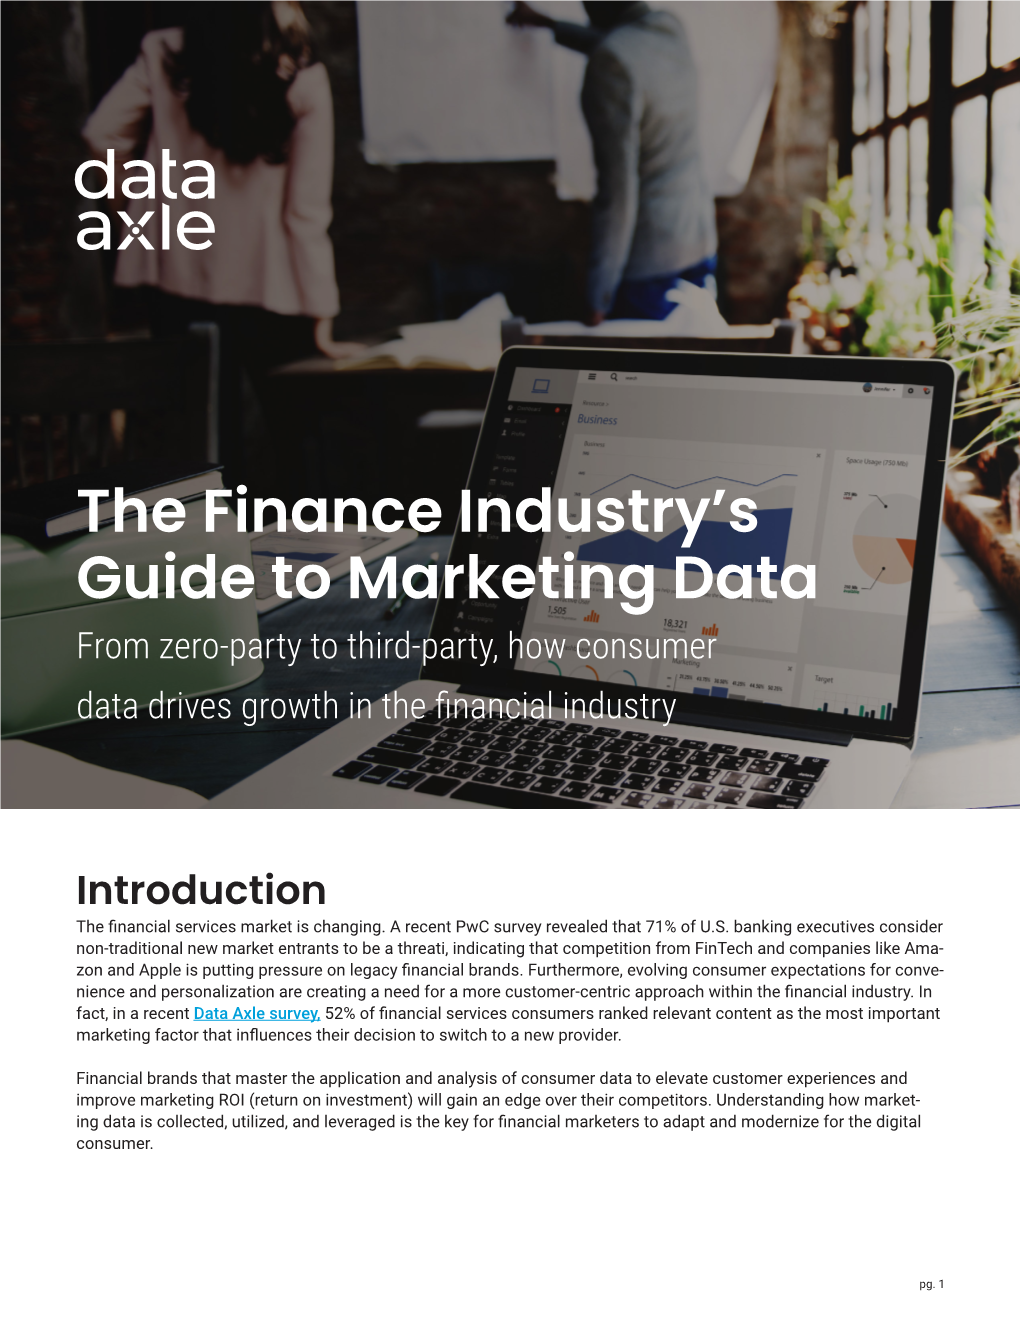 The Finance Industry's Guide to Marketing Data